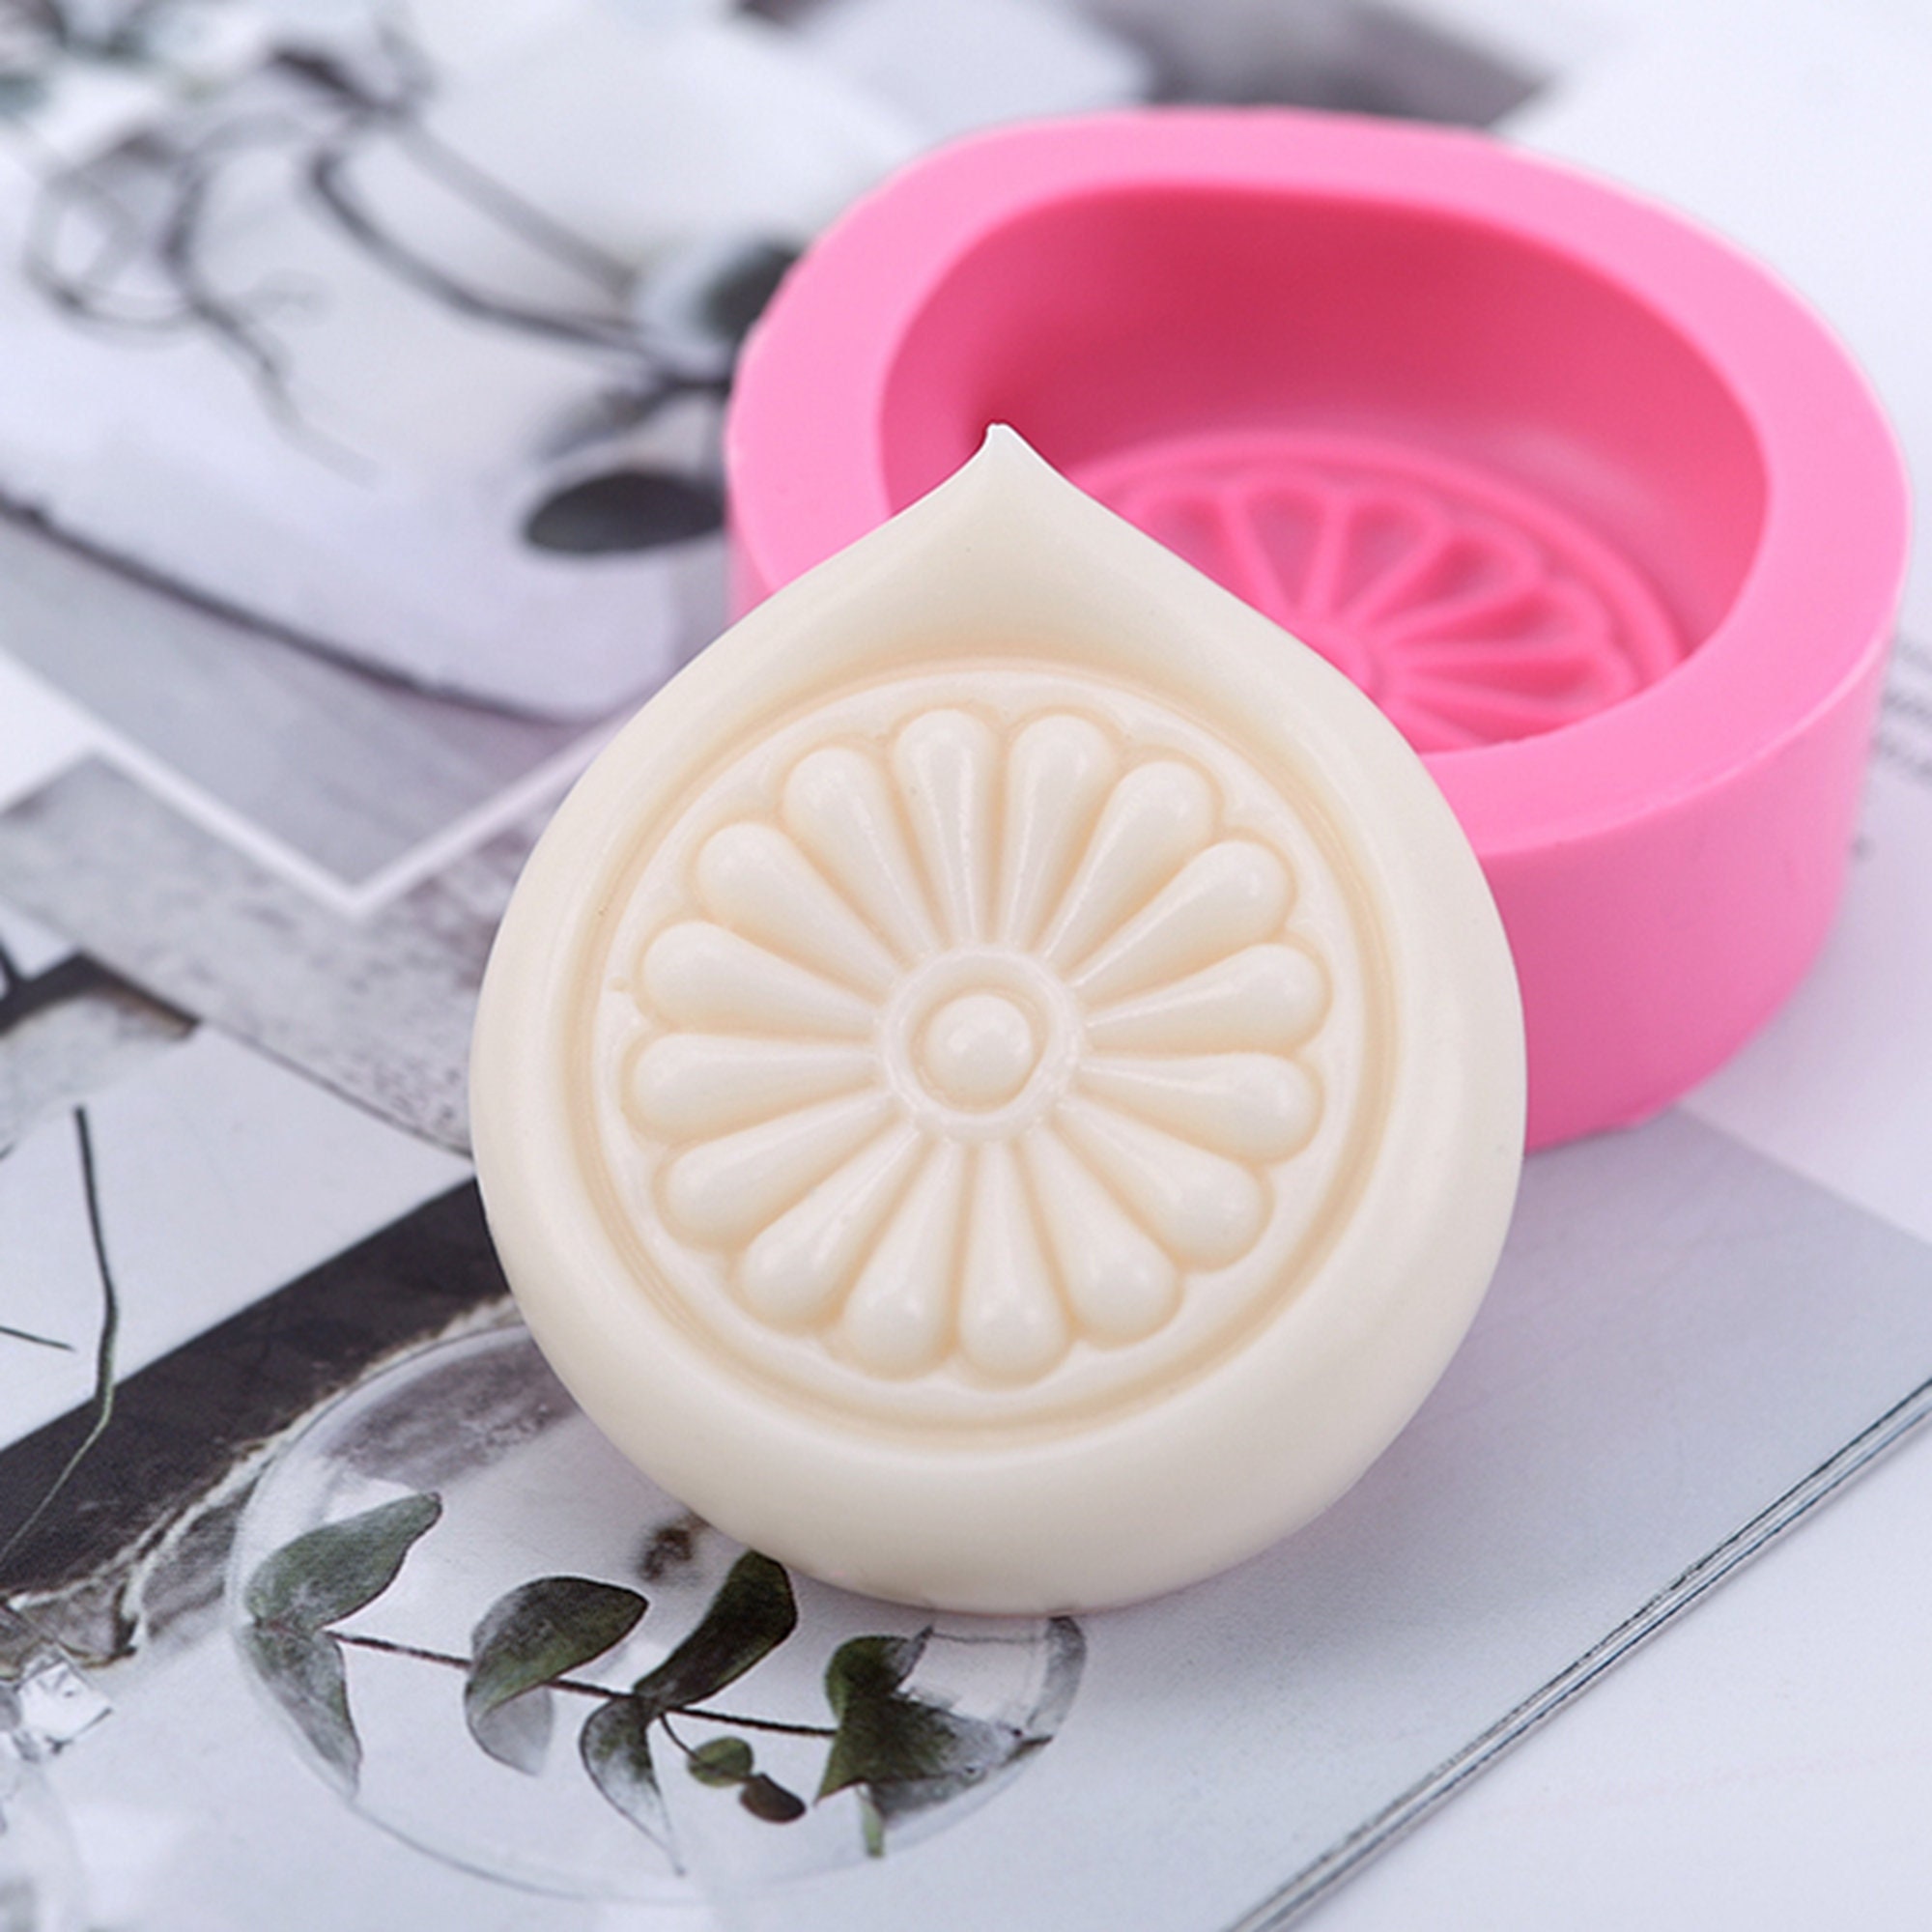 Lovely Round Soap Mold Silicone Rose Soap Bar Mould Handmade